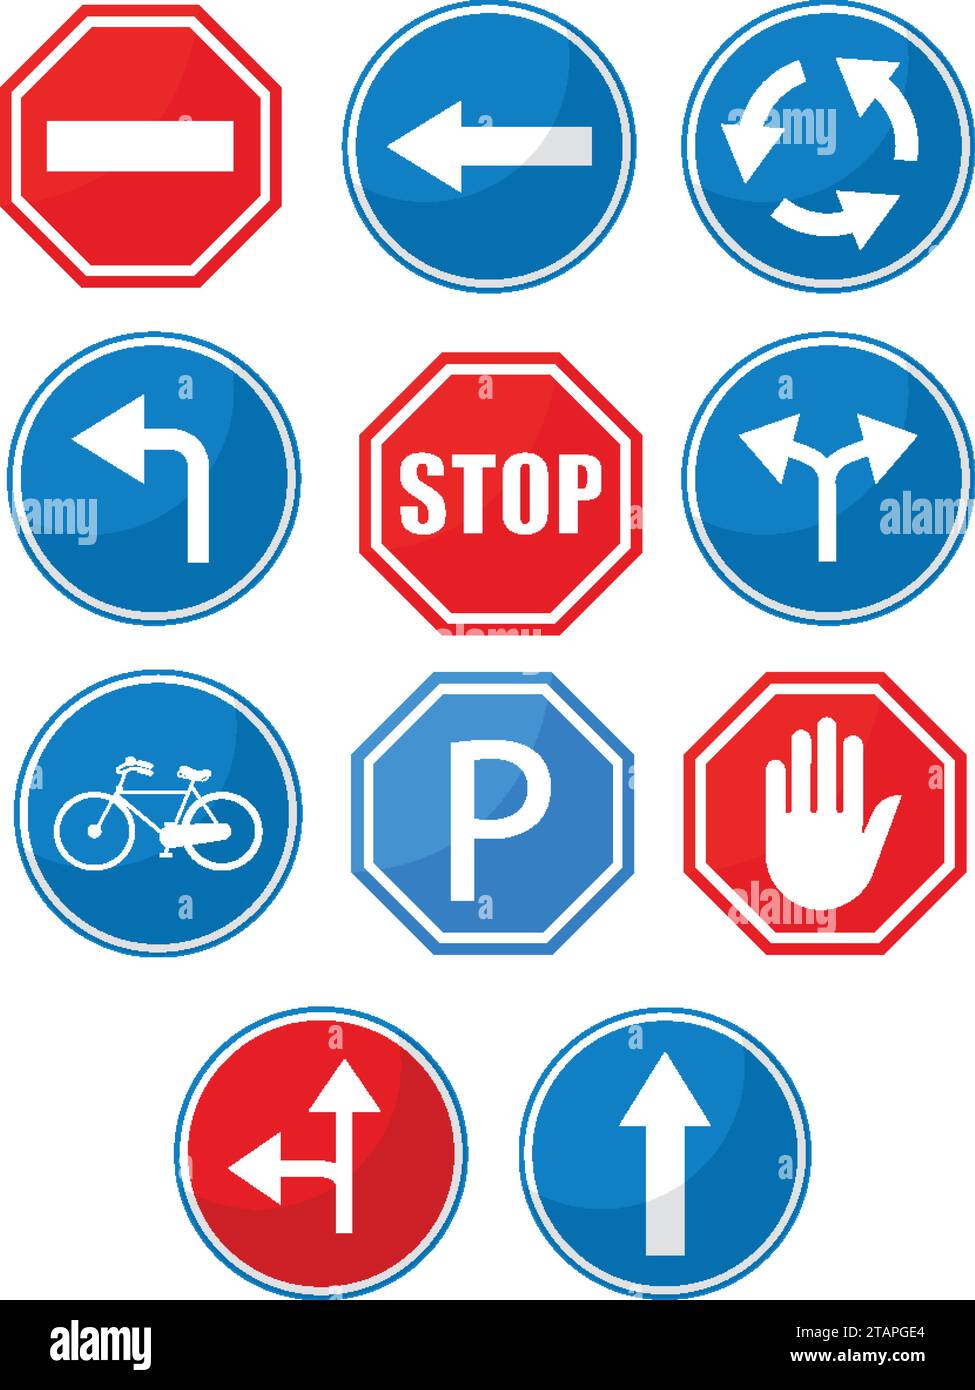 Traffic sign collection. red, blue, green and yellow warning, priority, prohibitory, mandatory... road sings set. vector art image illustration Stock Vector